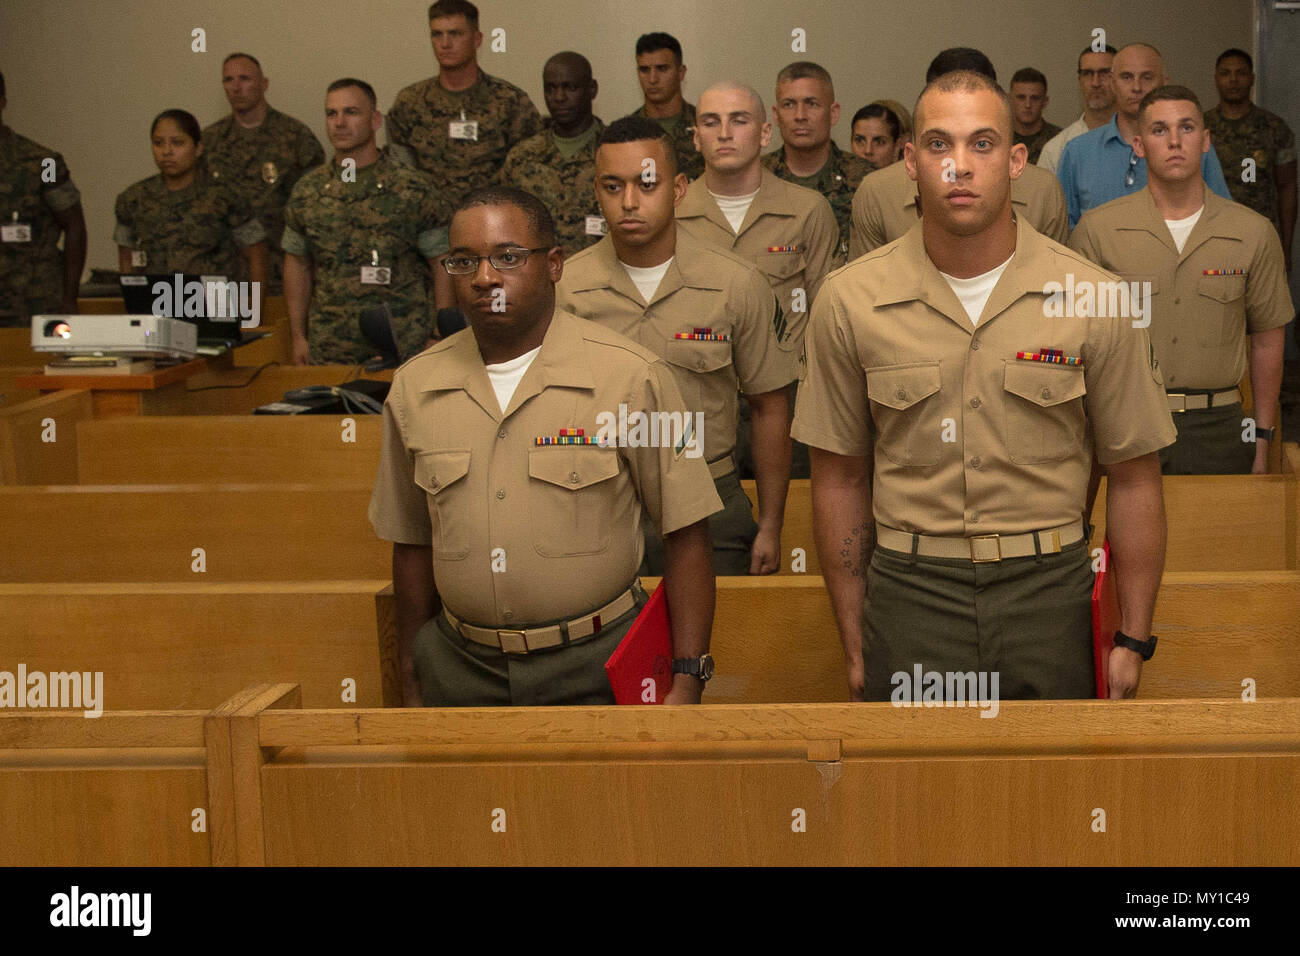 CAMP HANSEN, OKINAWA, Japan - Lance Cpl. Cory Watkins, right, and Pfc. Keanté Anderson, left, stand at the position of attention as Anchor’s Away plays May 30 on Camp Hansen, Okinawa, Japan. The Correctional Custody Unit 2.0 (CCU) graduation was held to commemorate the return of Marines to their units. Lance Cpl. Cory Watkins returned 3rd Battalion, 3rd Marine Regiment and Pfc. Keanté Anderson returned to Marine Air Control Squadron 4, Marine Tactical Air Command Squadron 18. Stock Photo